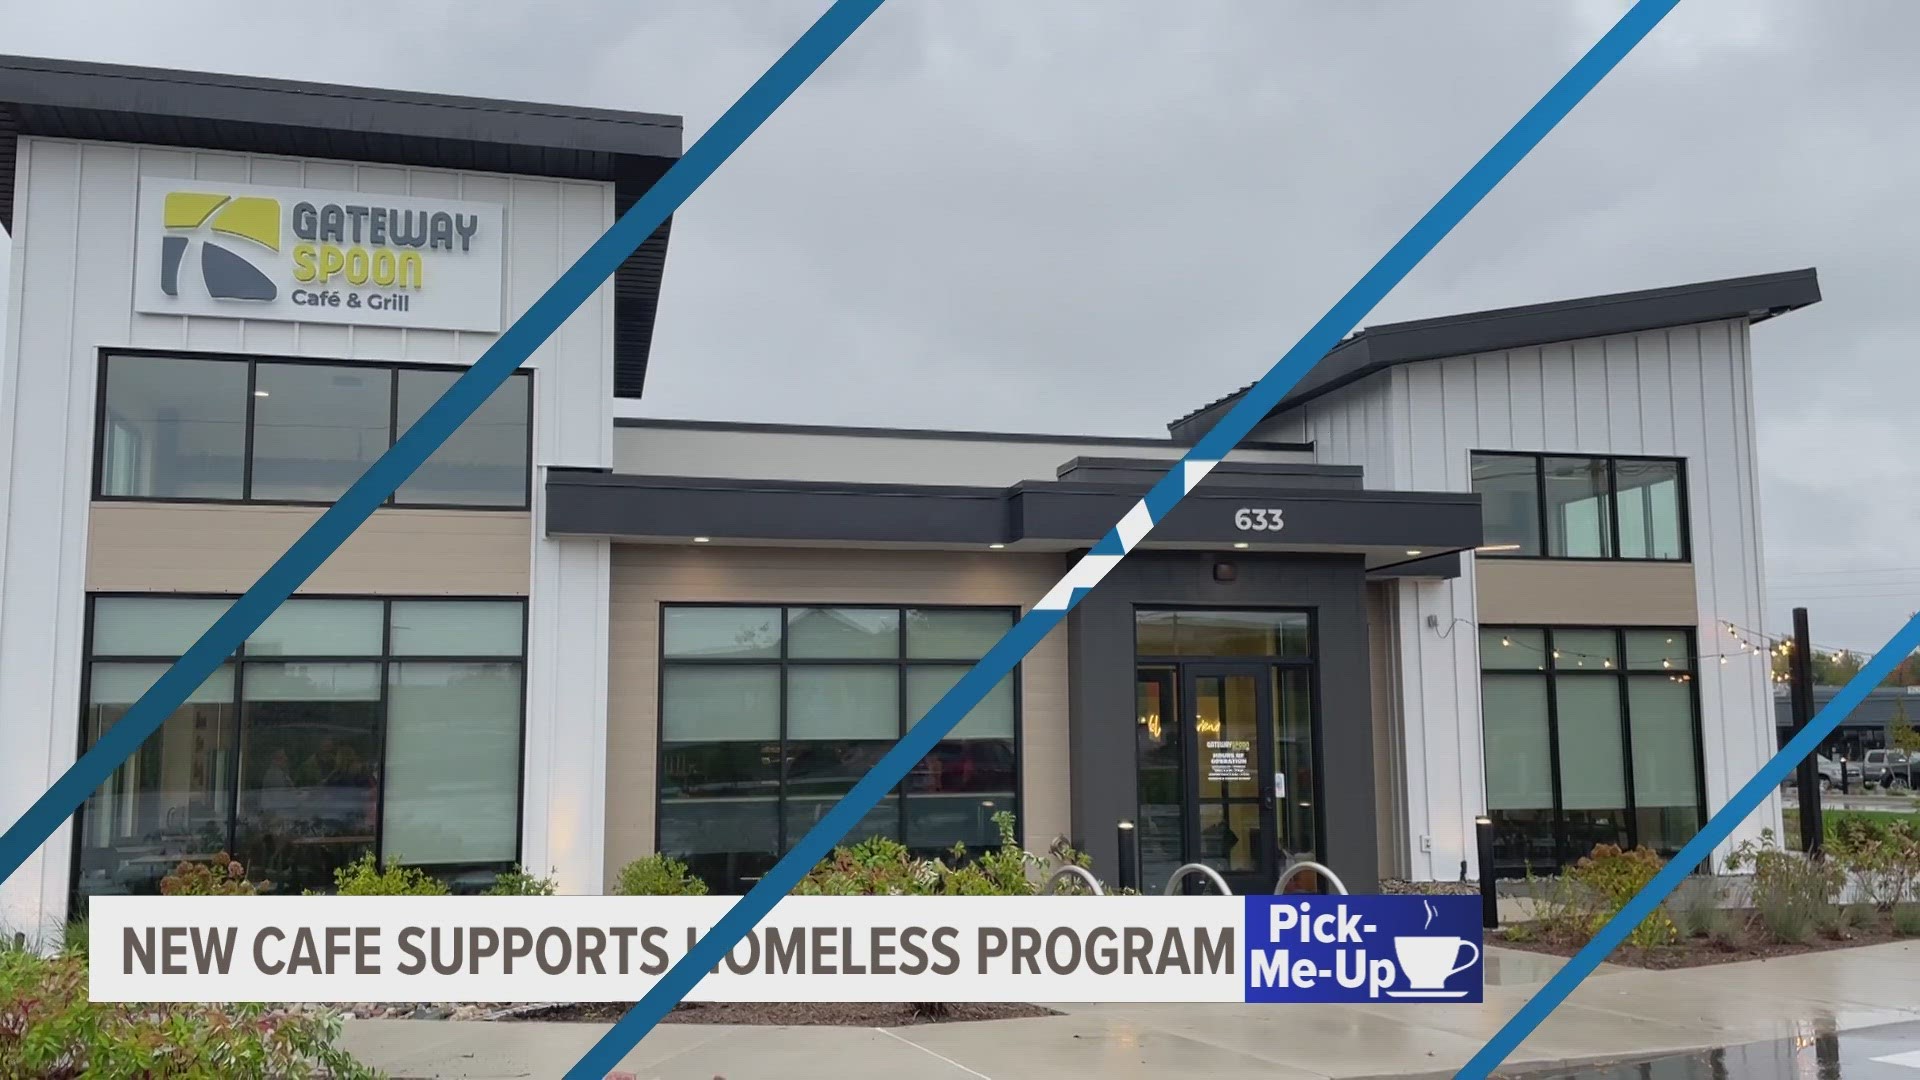 The business run by Gateway Mission is part of their outreach for the homeless and less fortunate